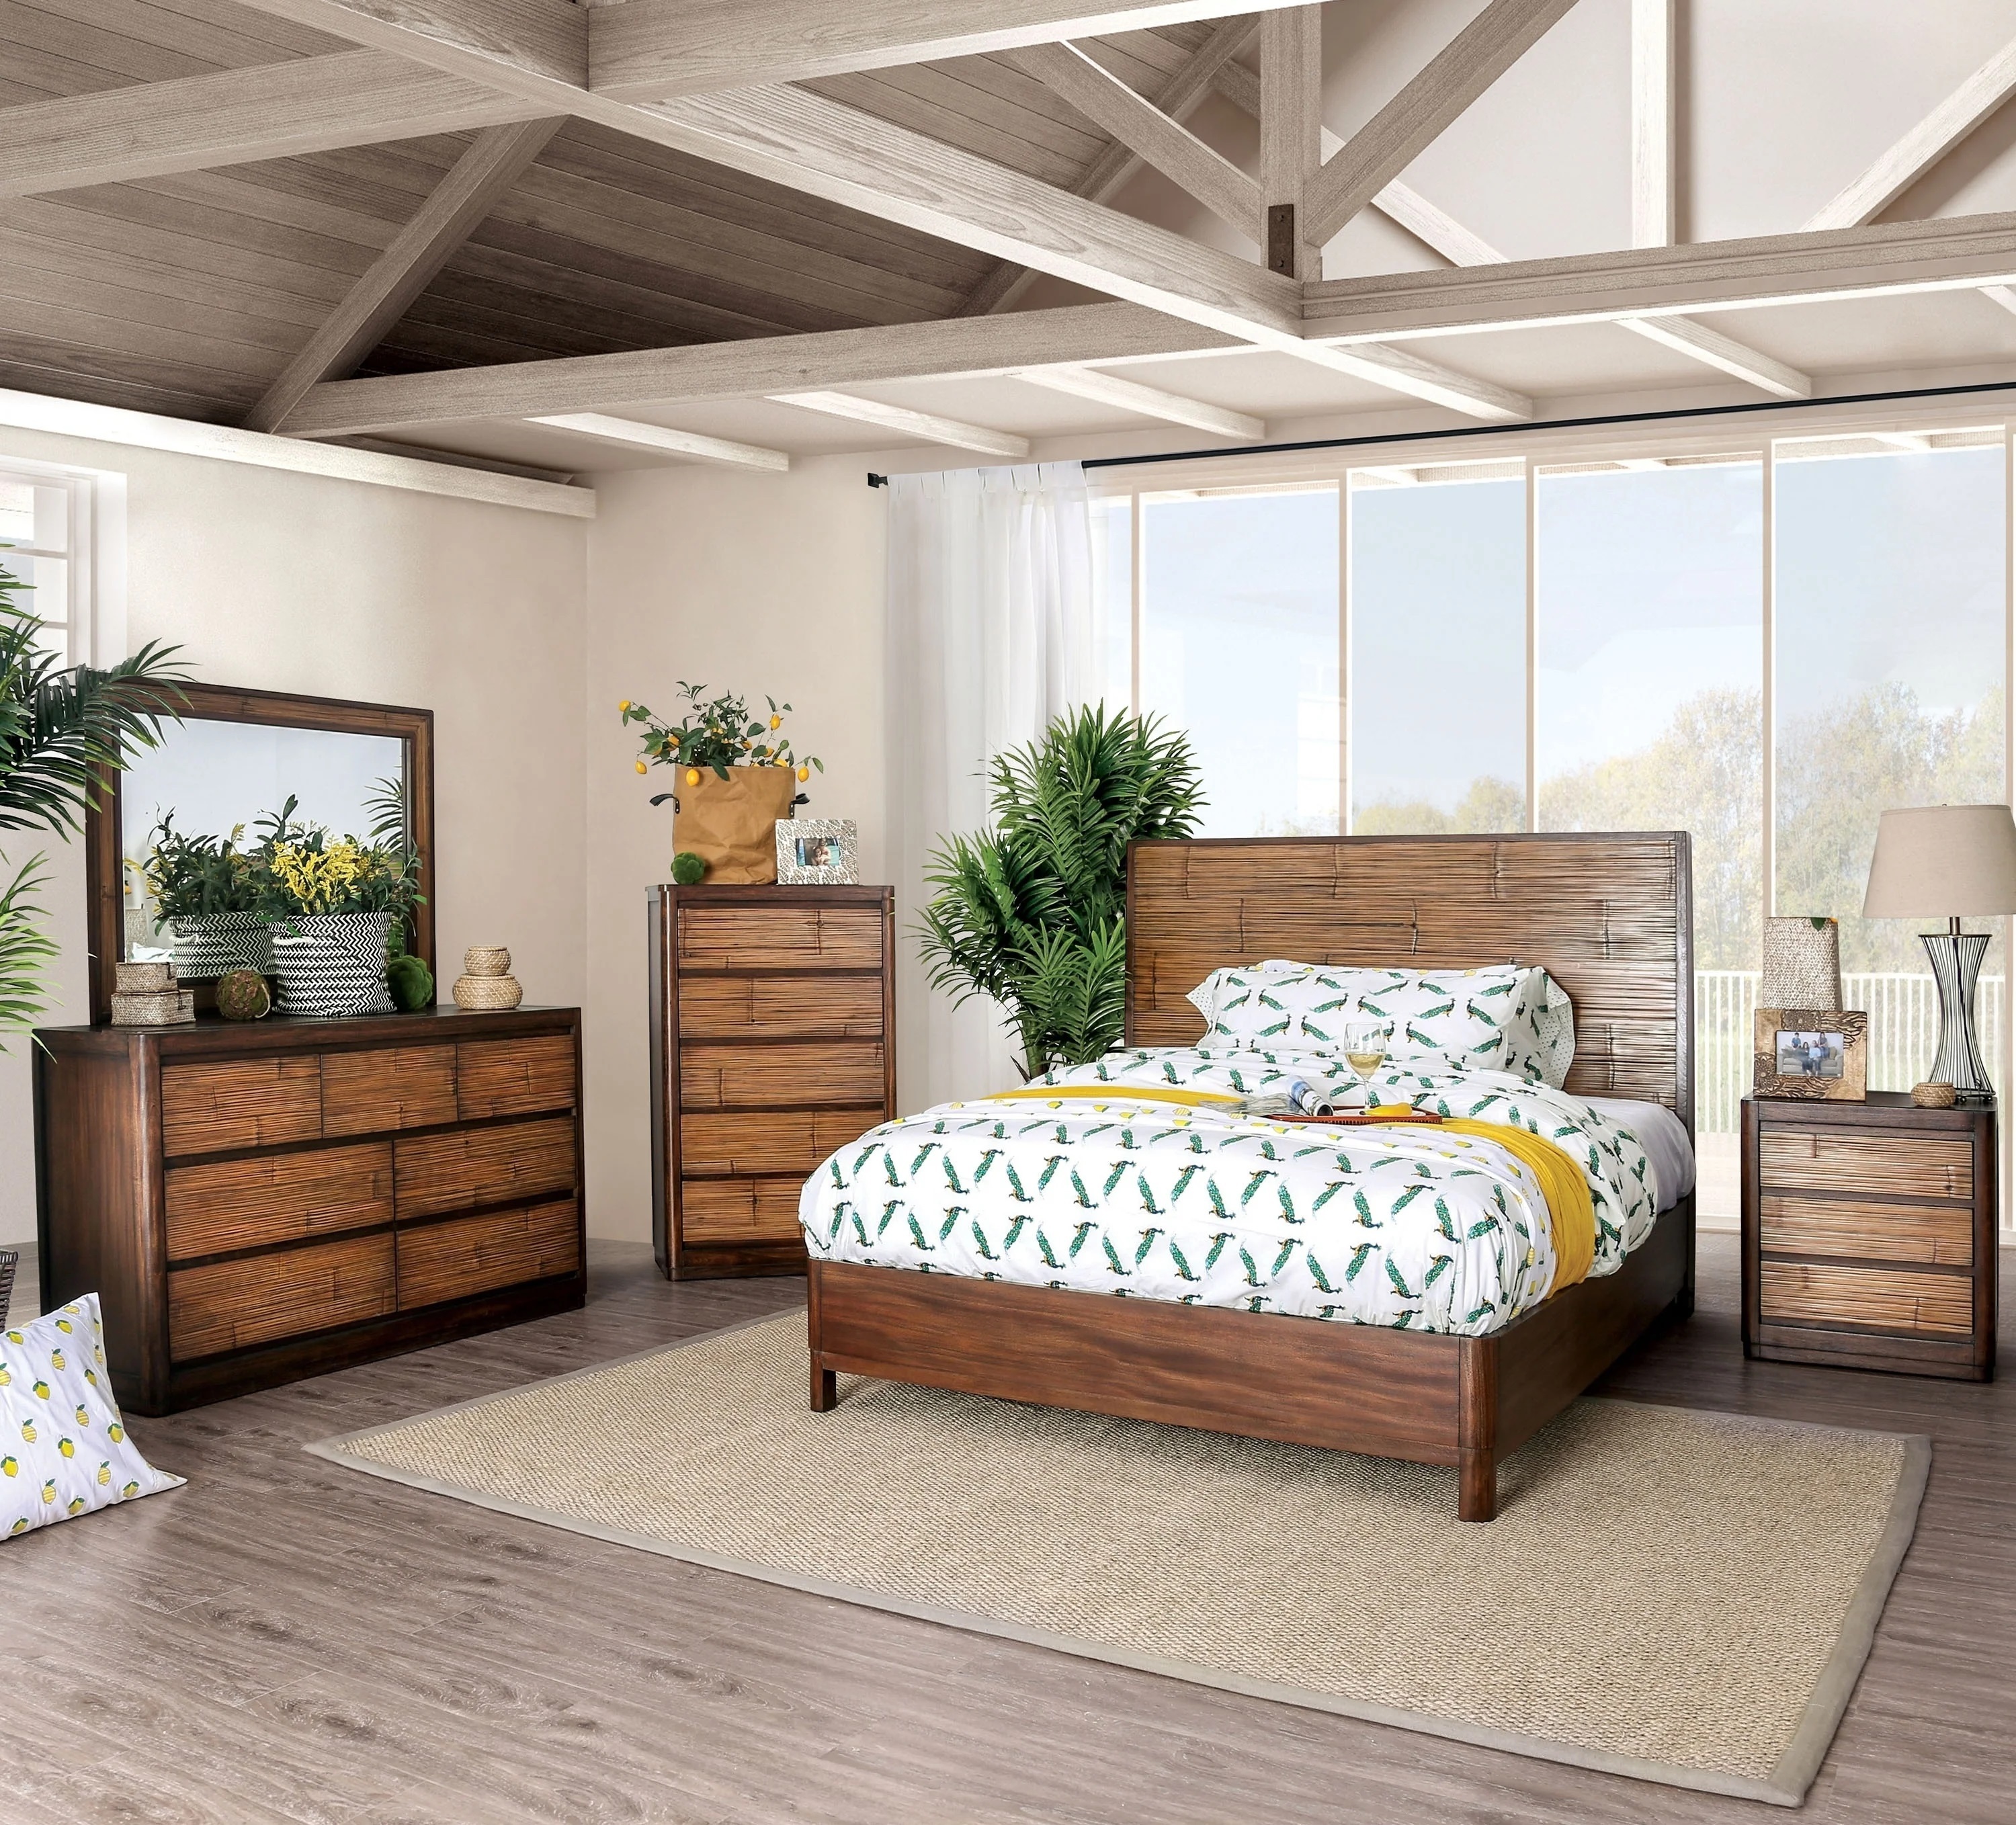 Distressed Bamboo Bedroom Furniture